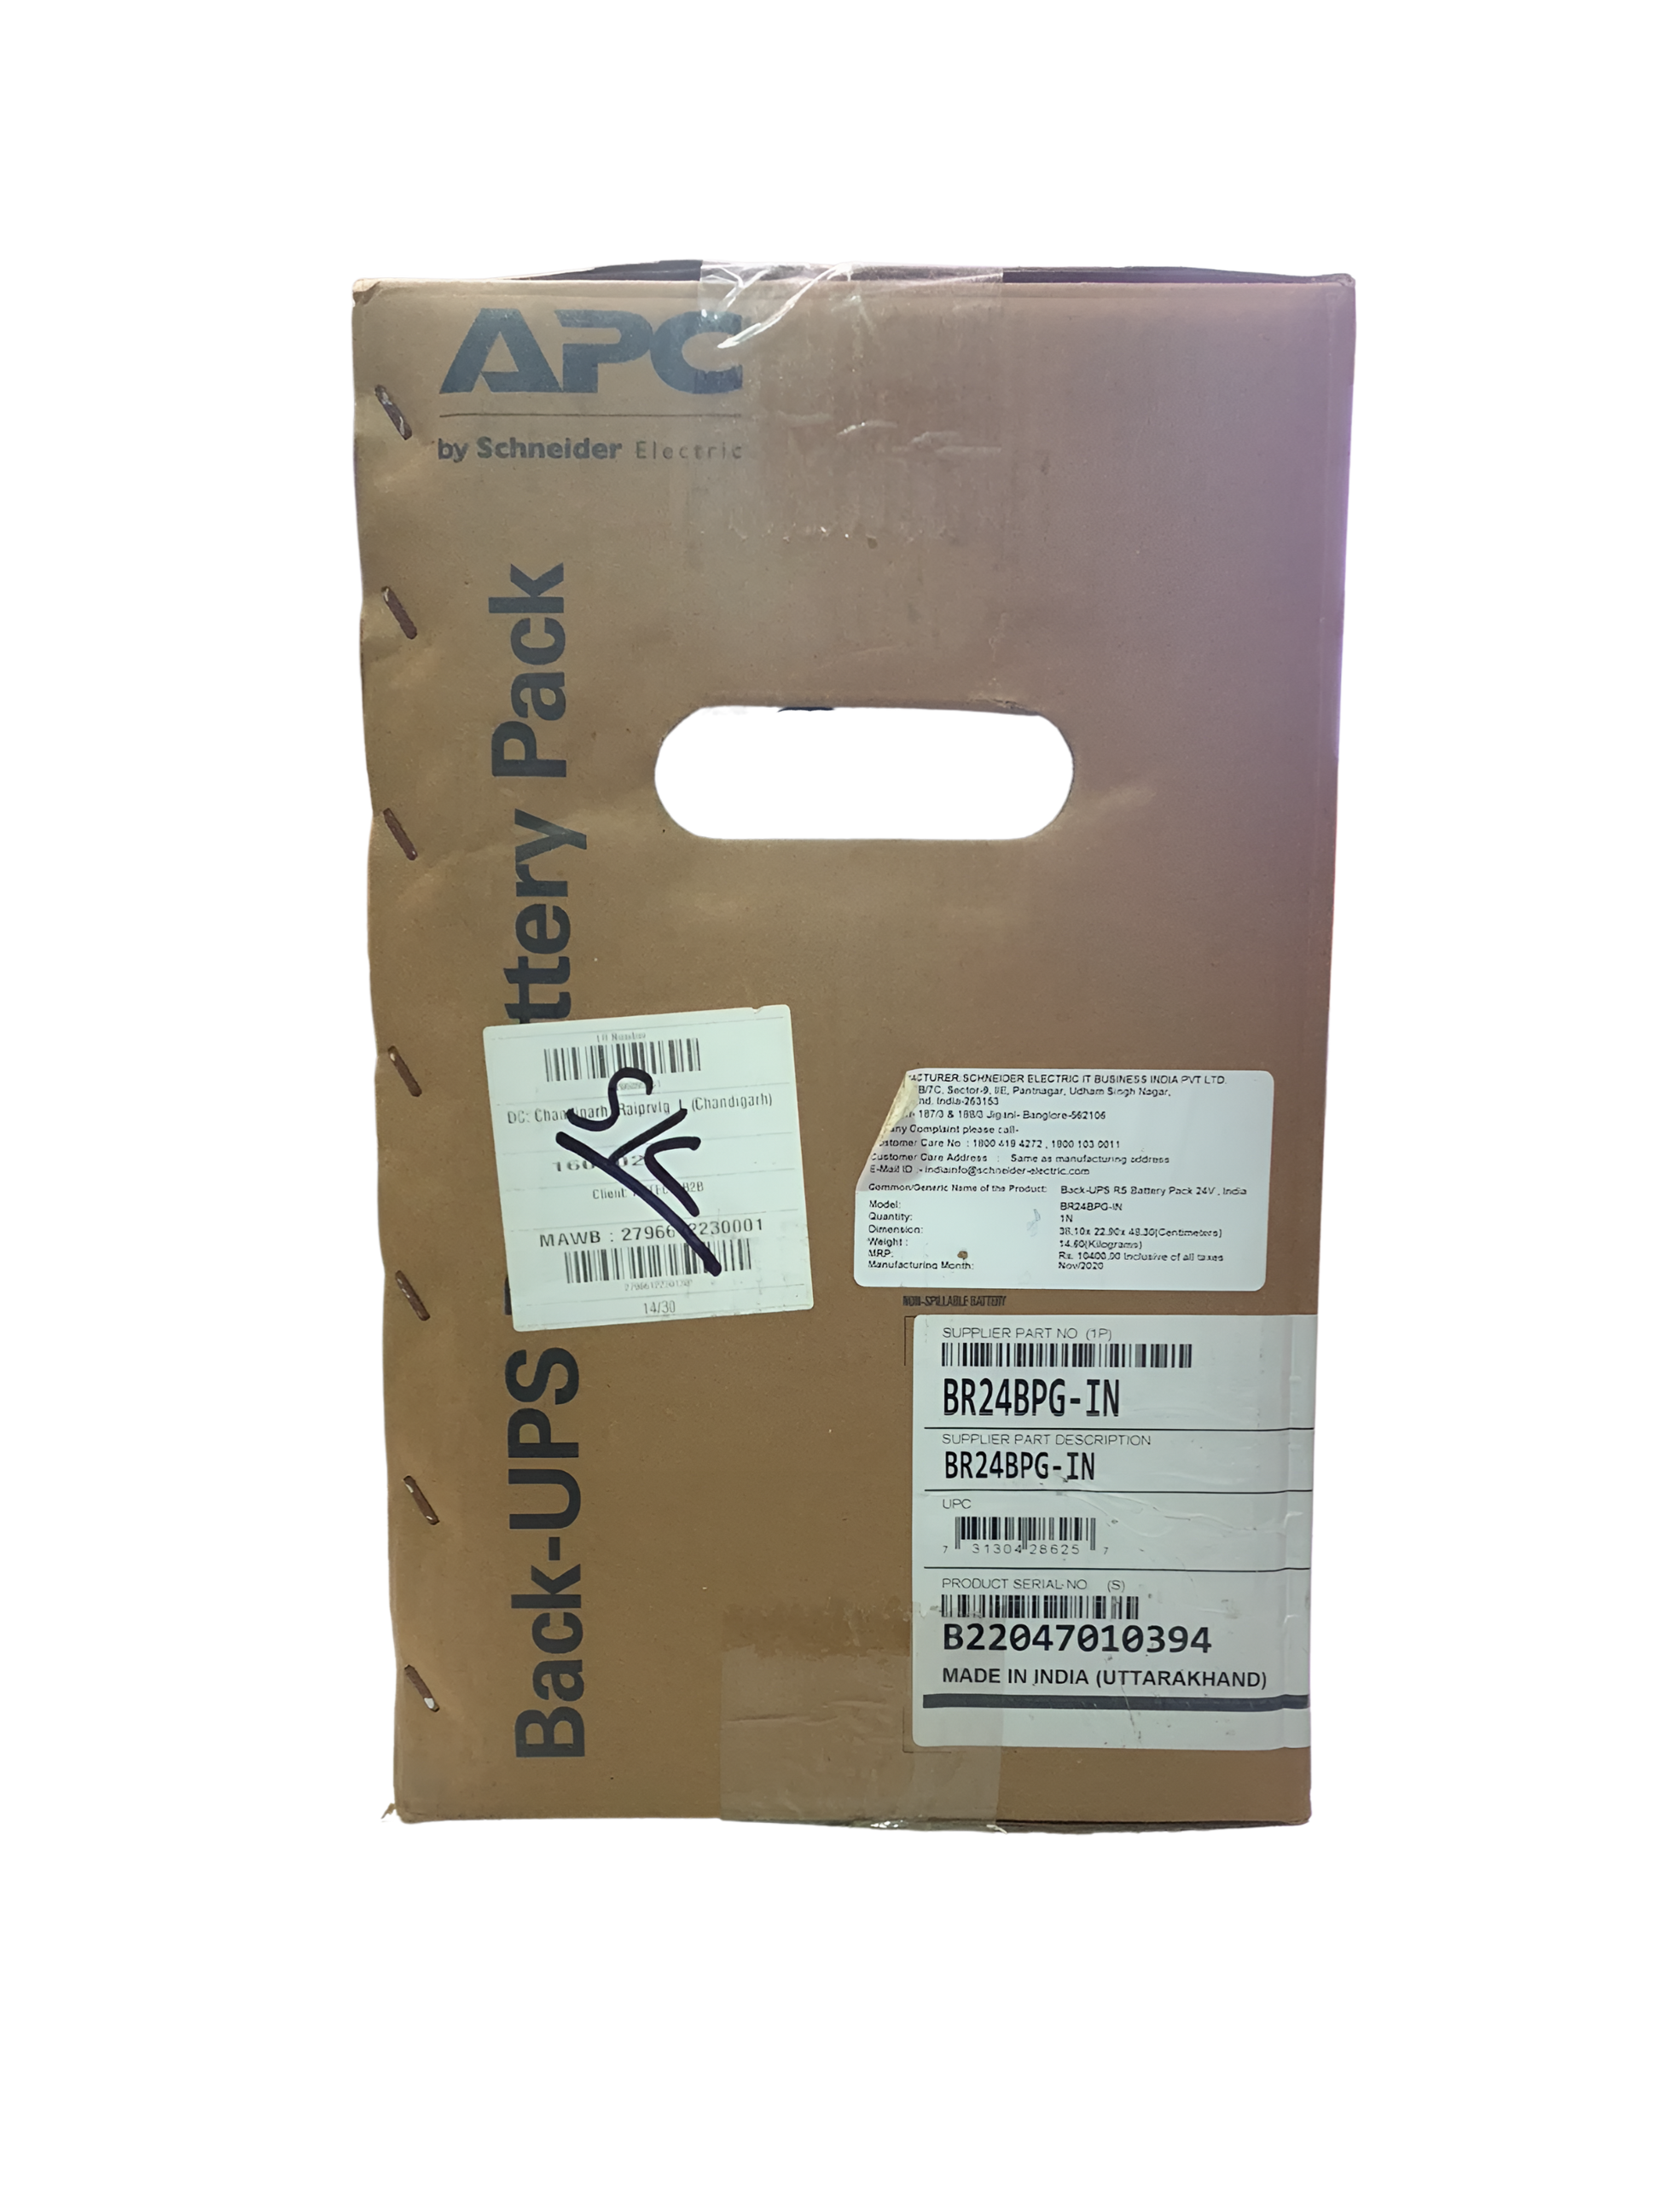 Apc Back-UPS Pro Battery Pack BR24BPG-IN-Battery Accessories-APC-computerspace